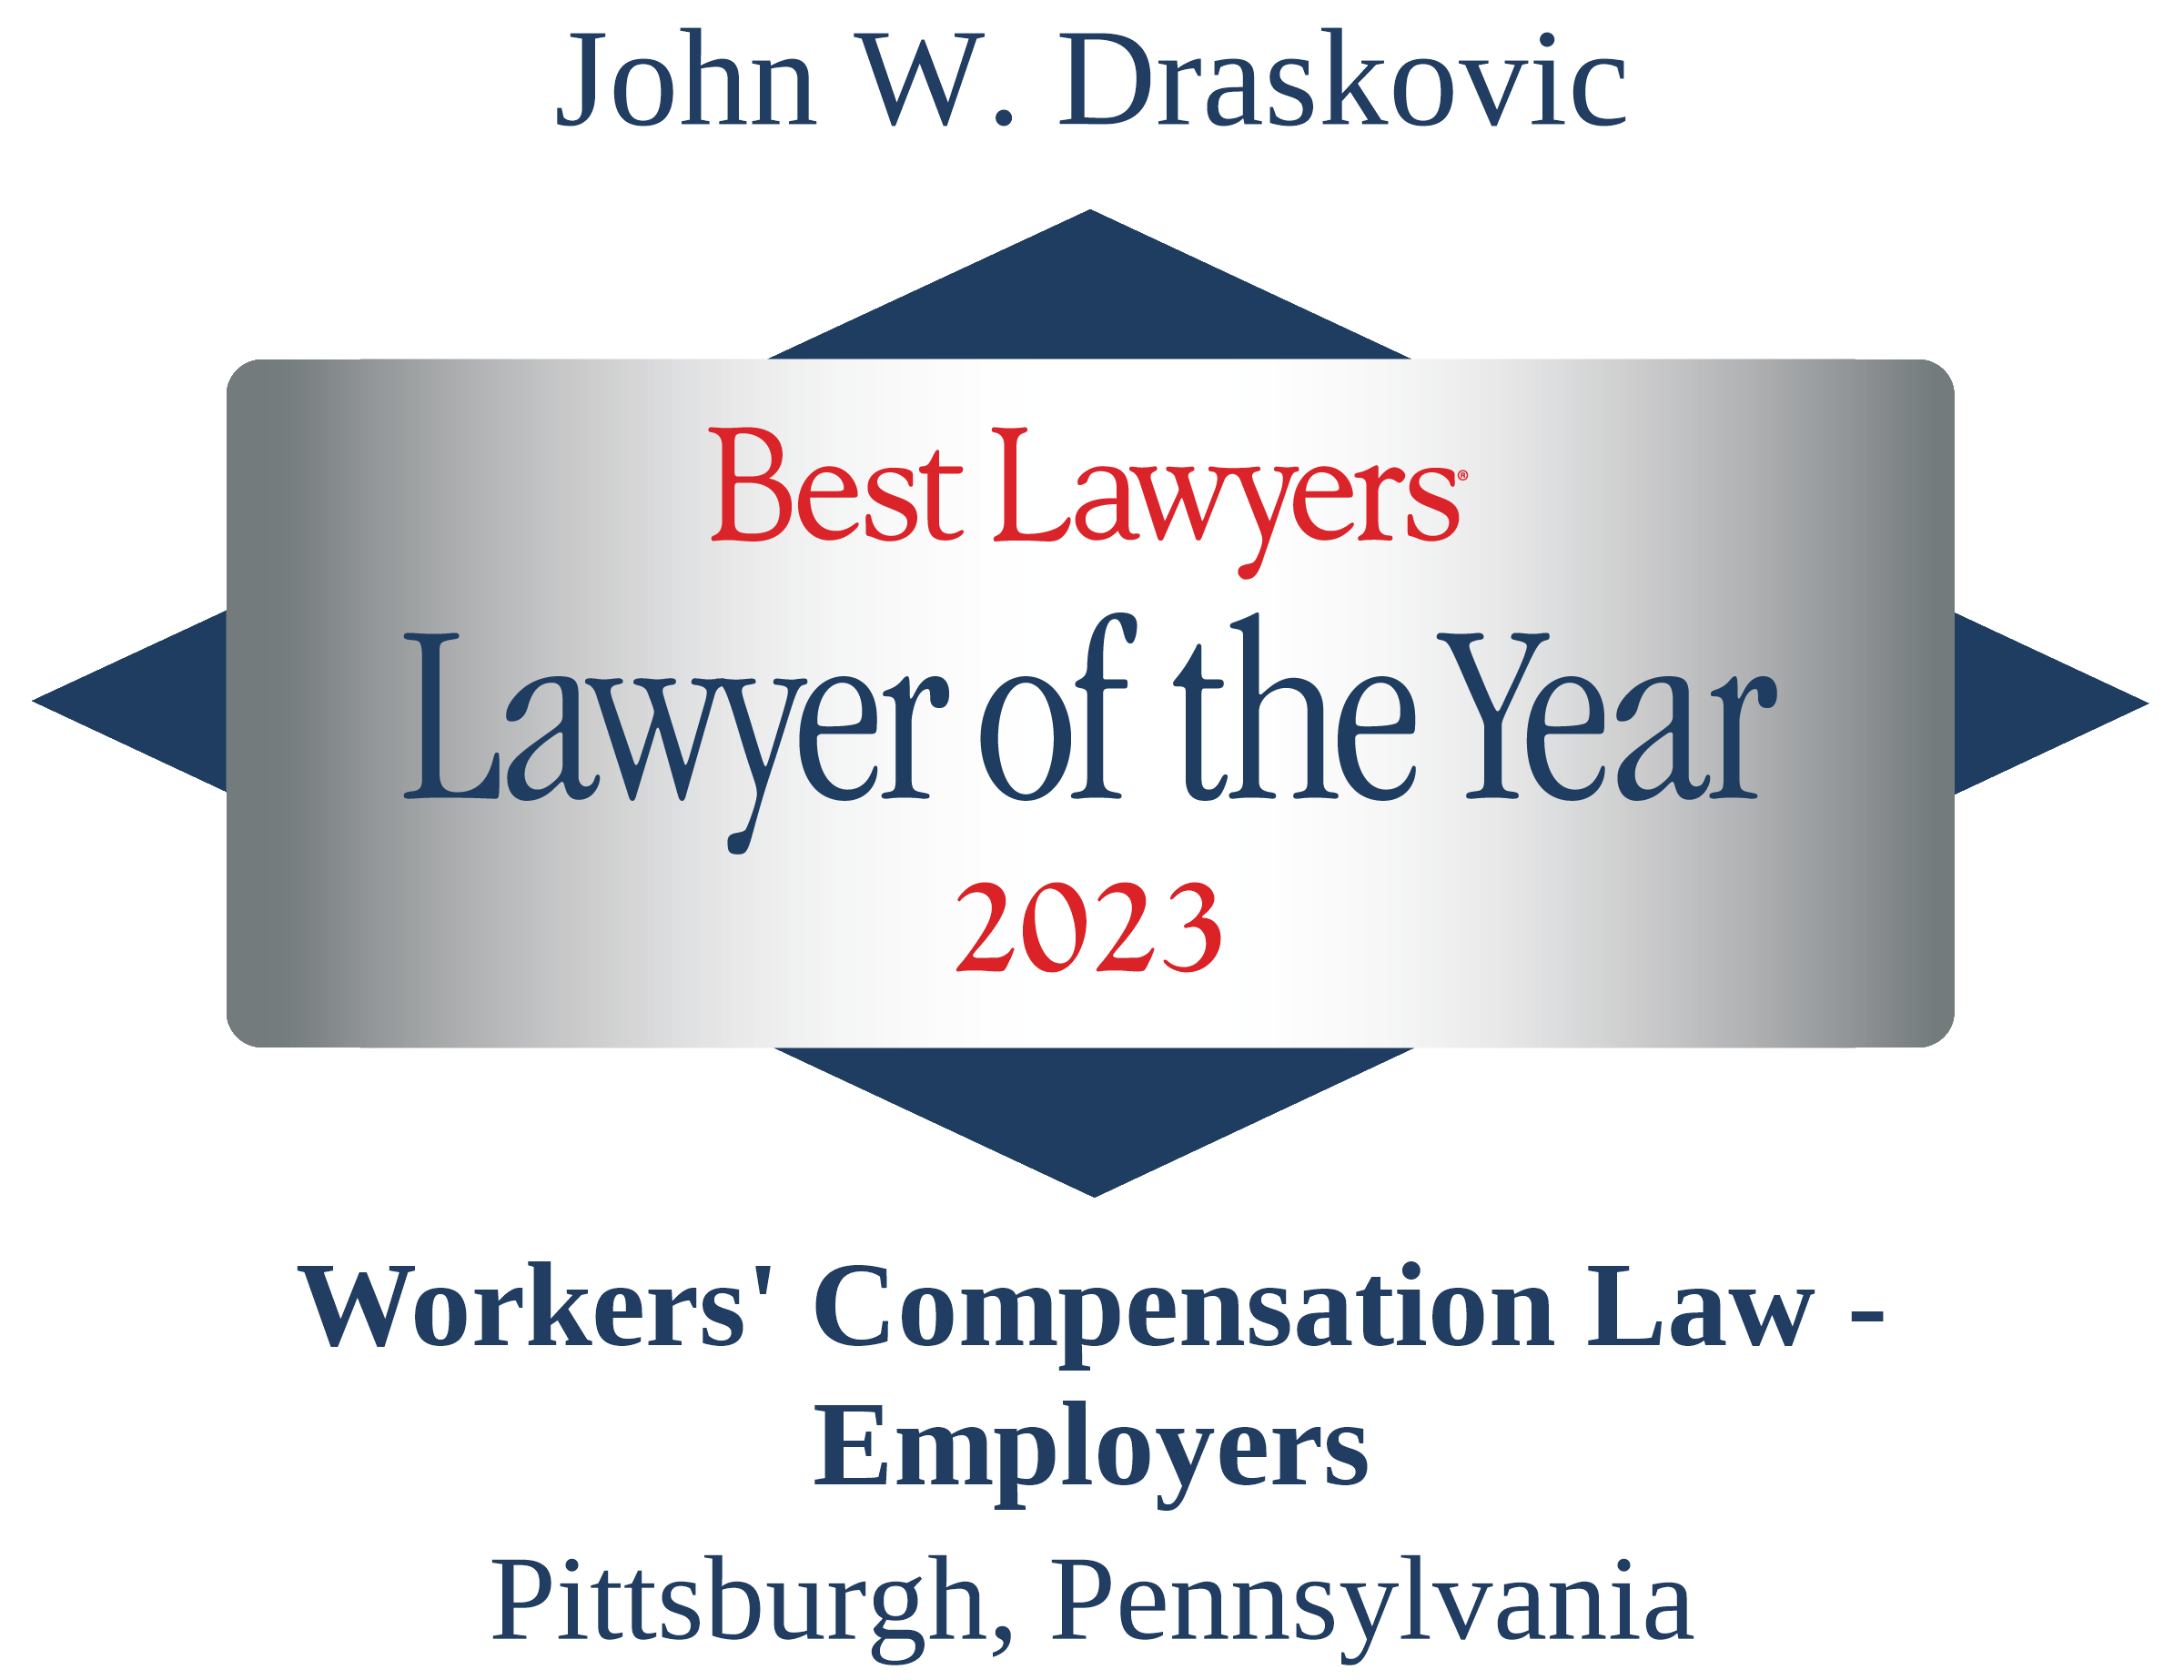 Best Lawyers - Lawyer of the Year 2023